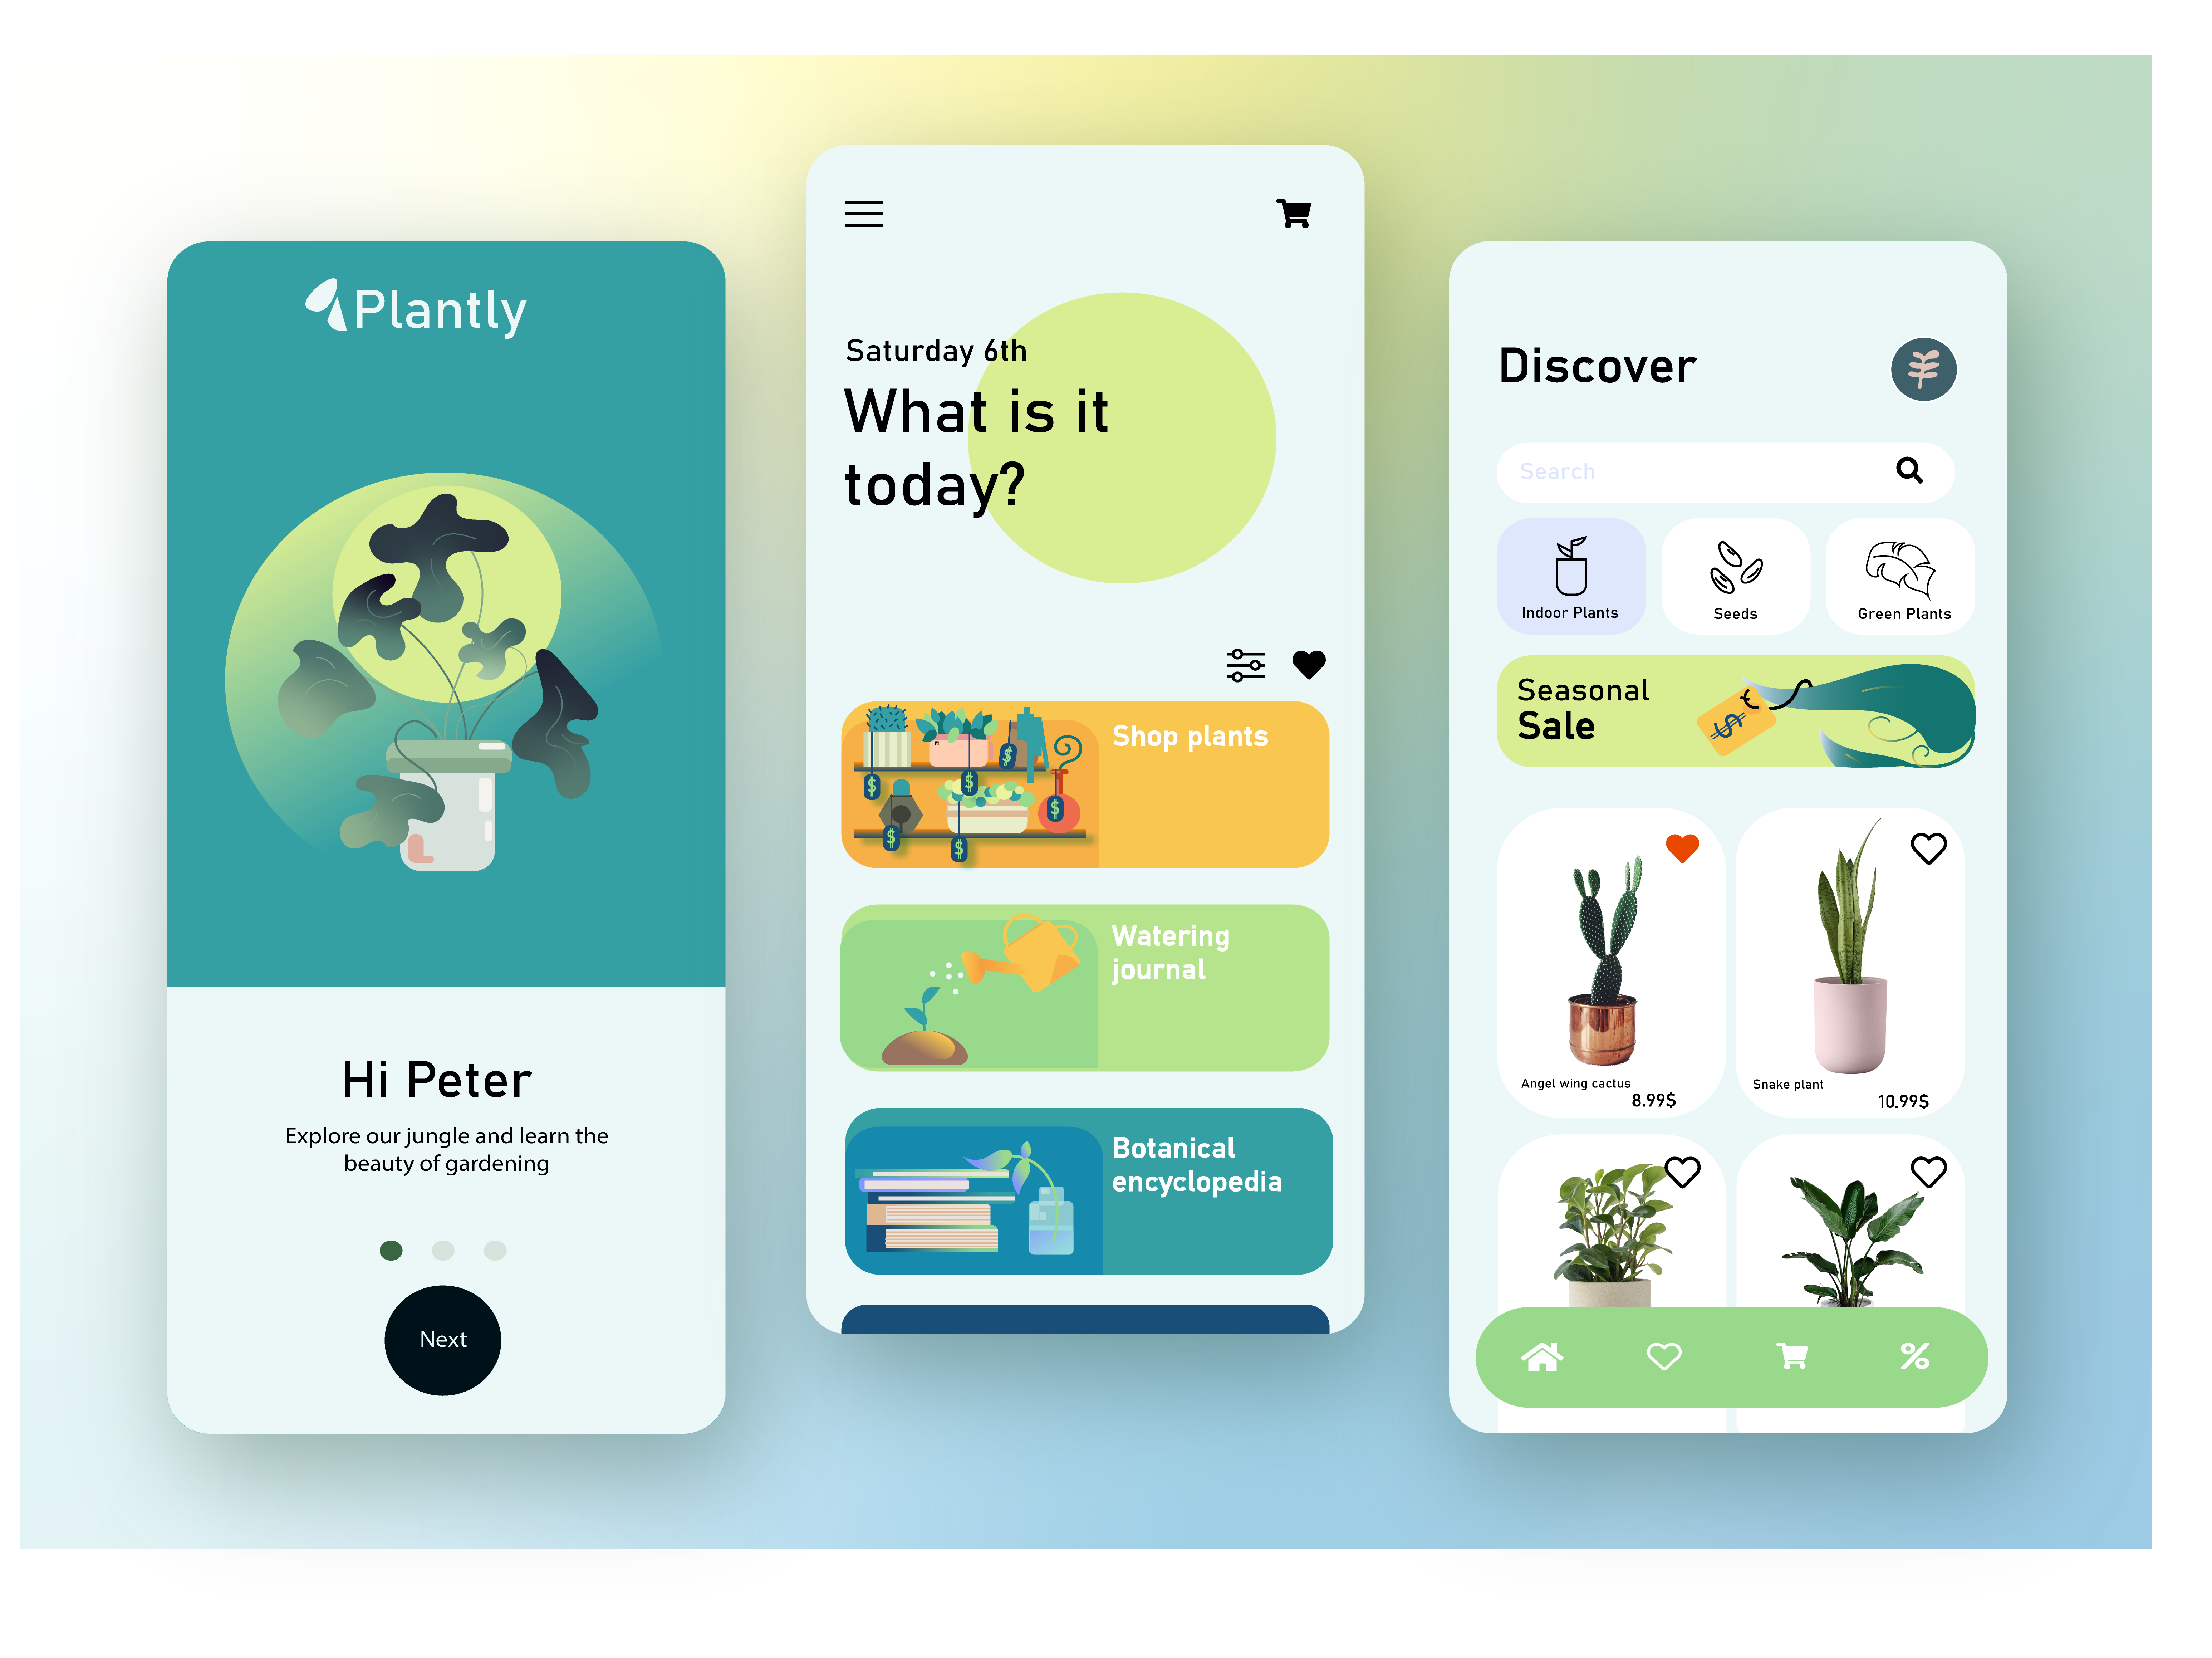 Hello beginner here! I'd love some critique and feedback on my latest UI/UX design based on a plant app - Plantly. It's an app where you can buy plants, search for info about them and keep track of their daily needs. Thank you for feedback in advance!!!